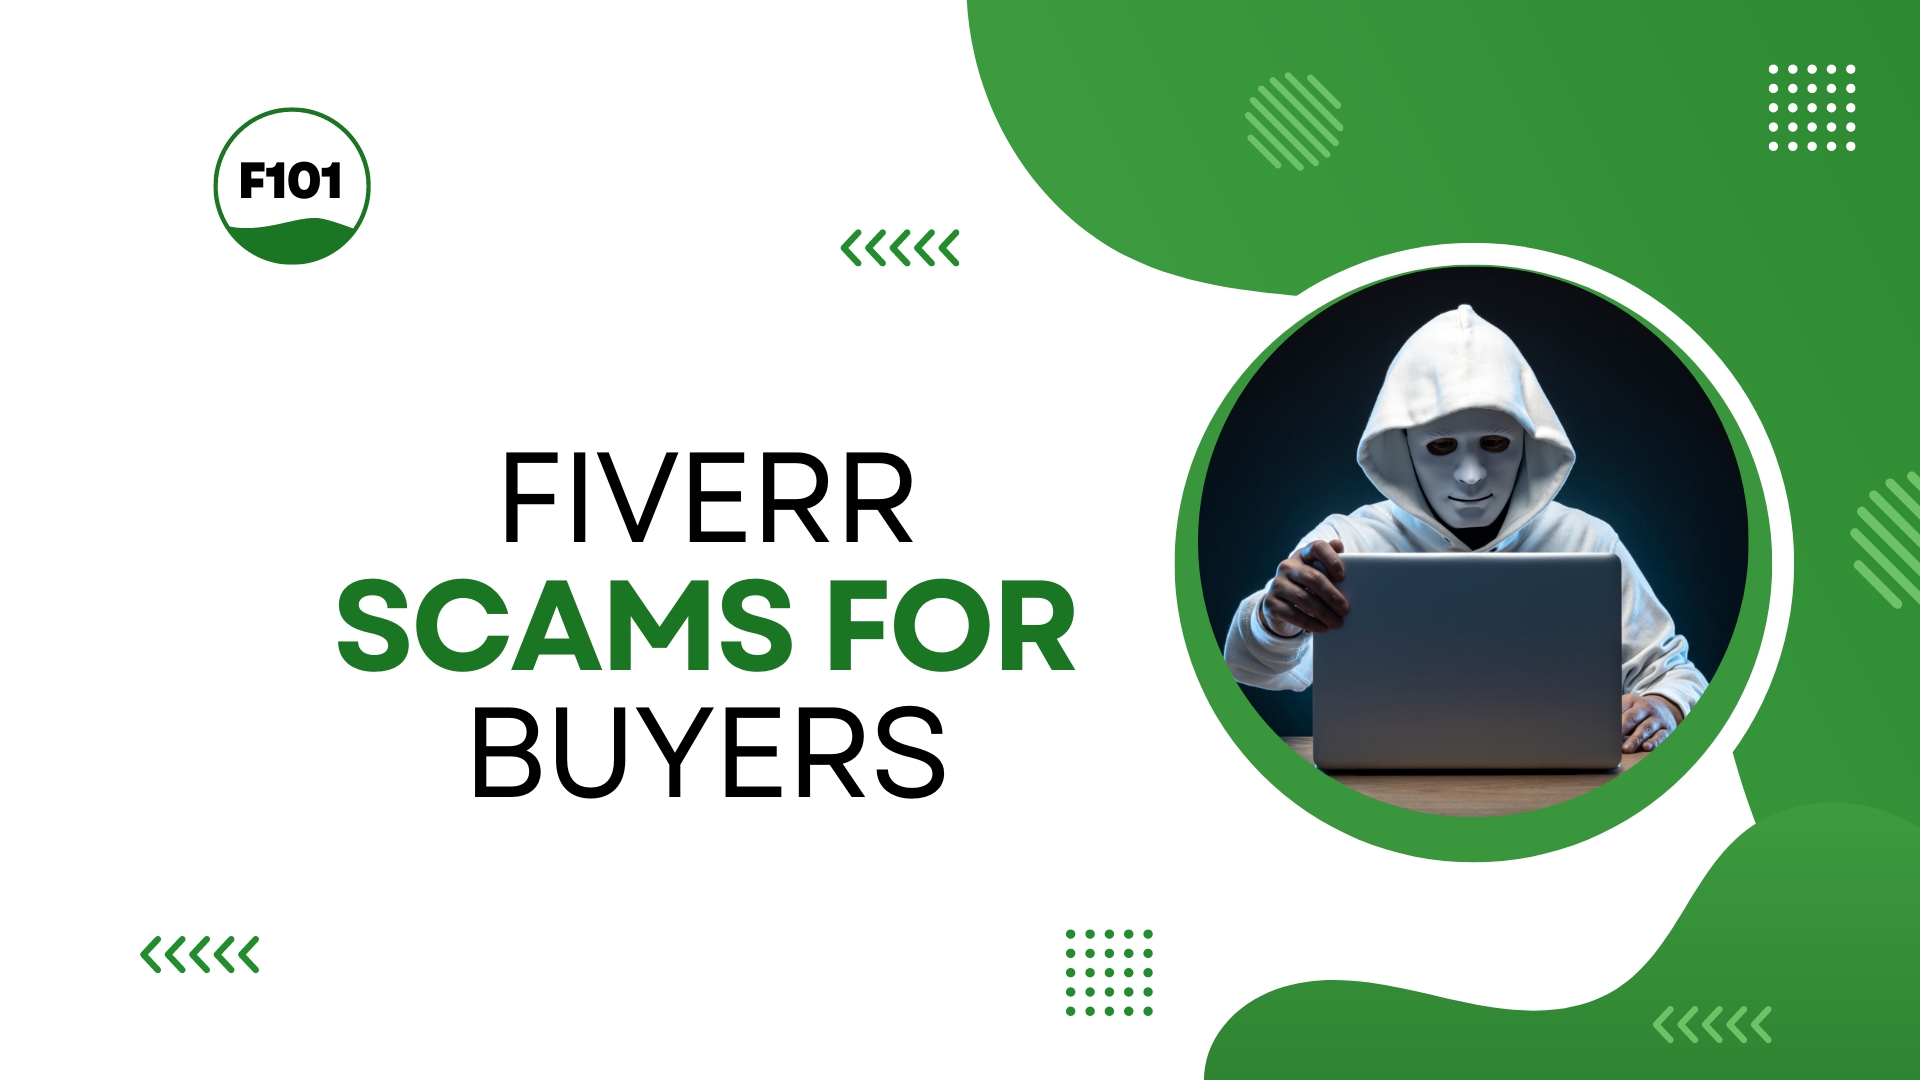 Fiverr Scams for Buyers